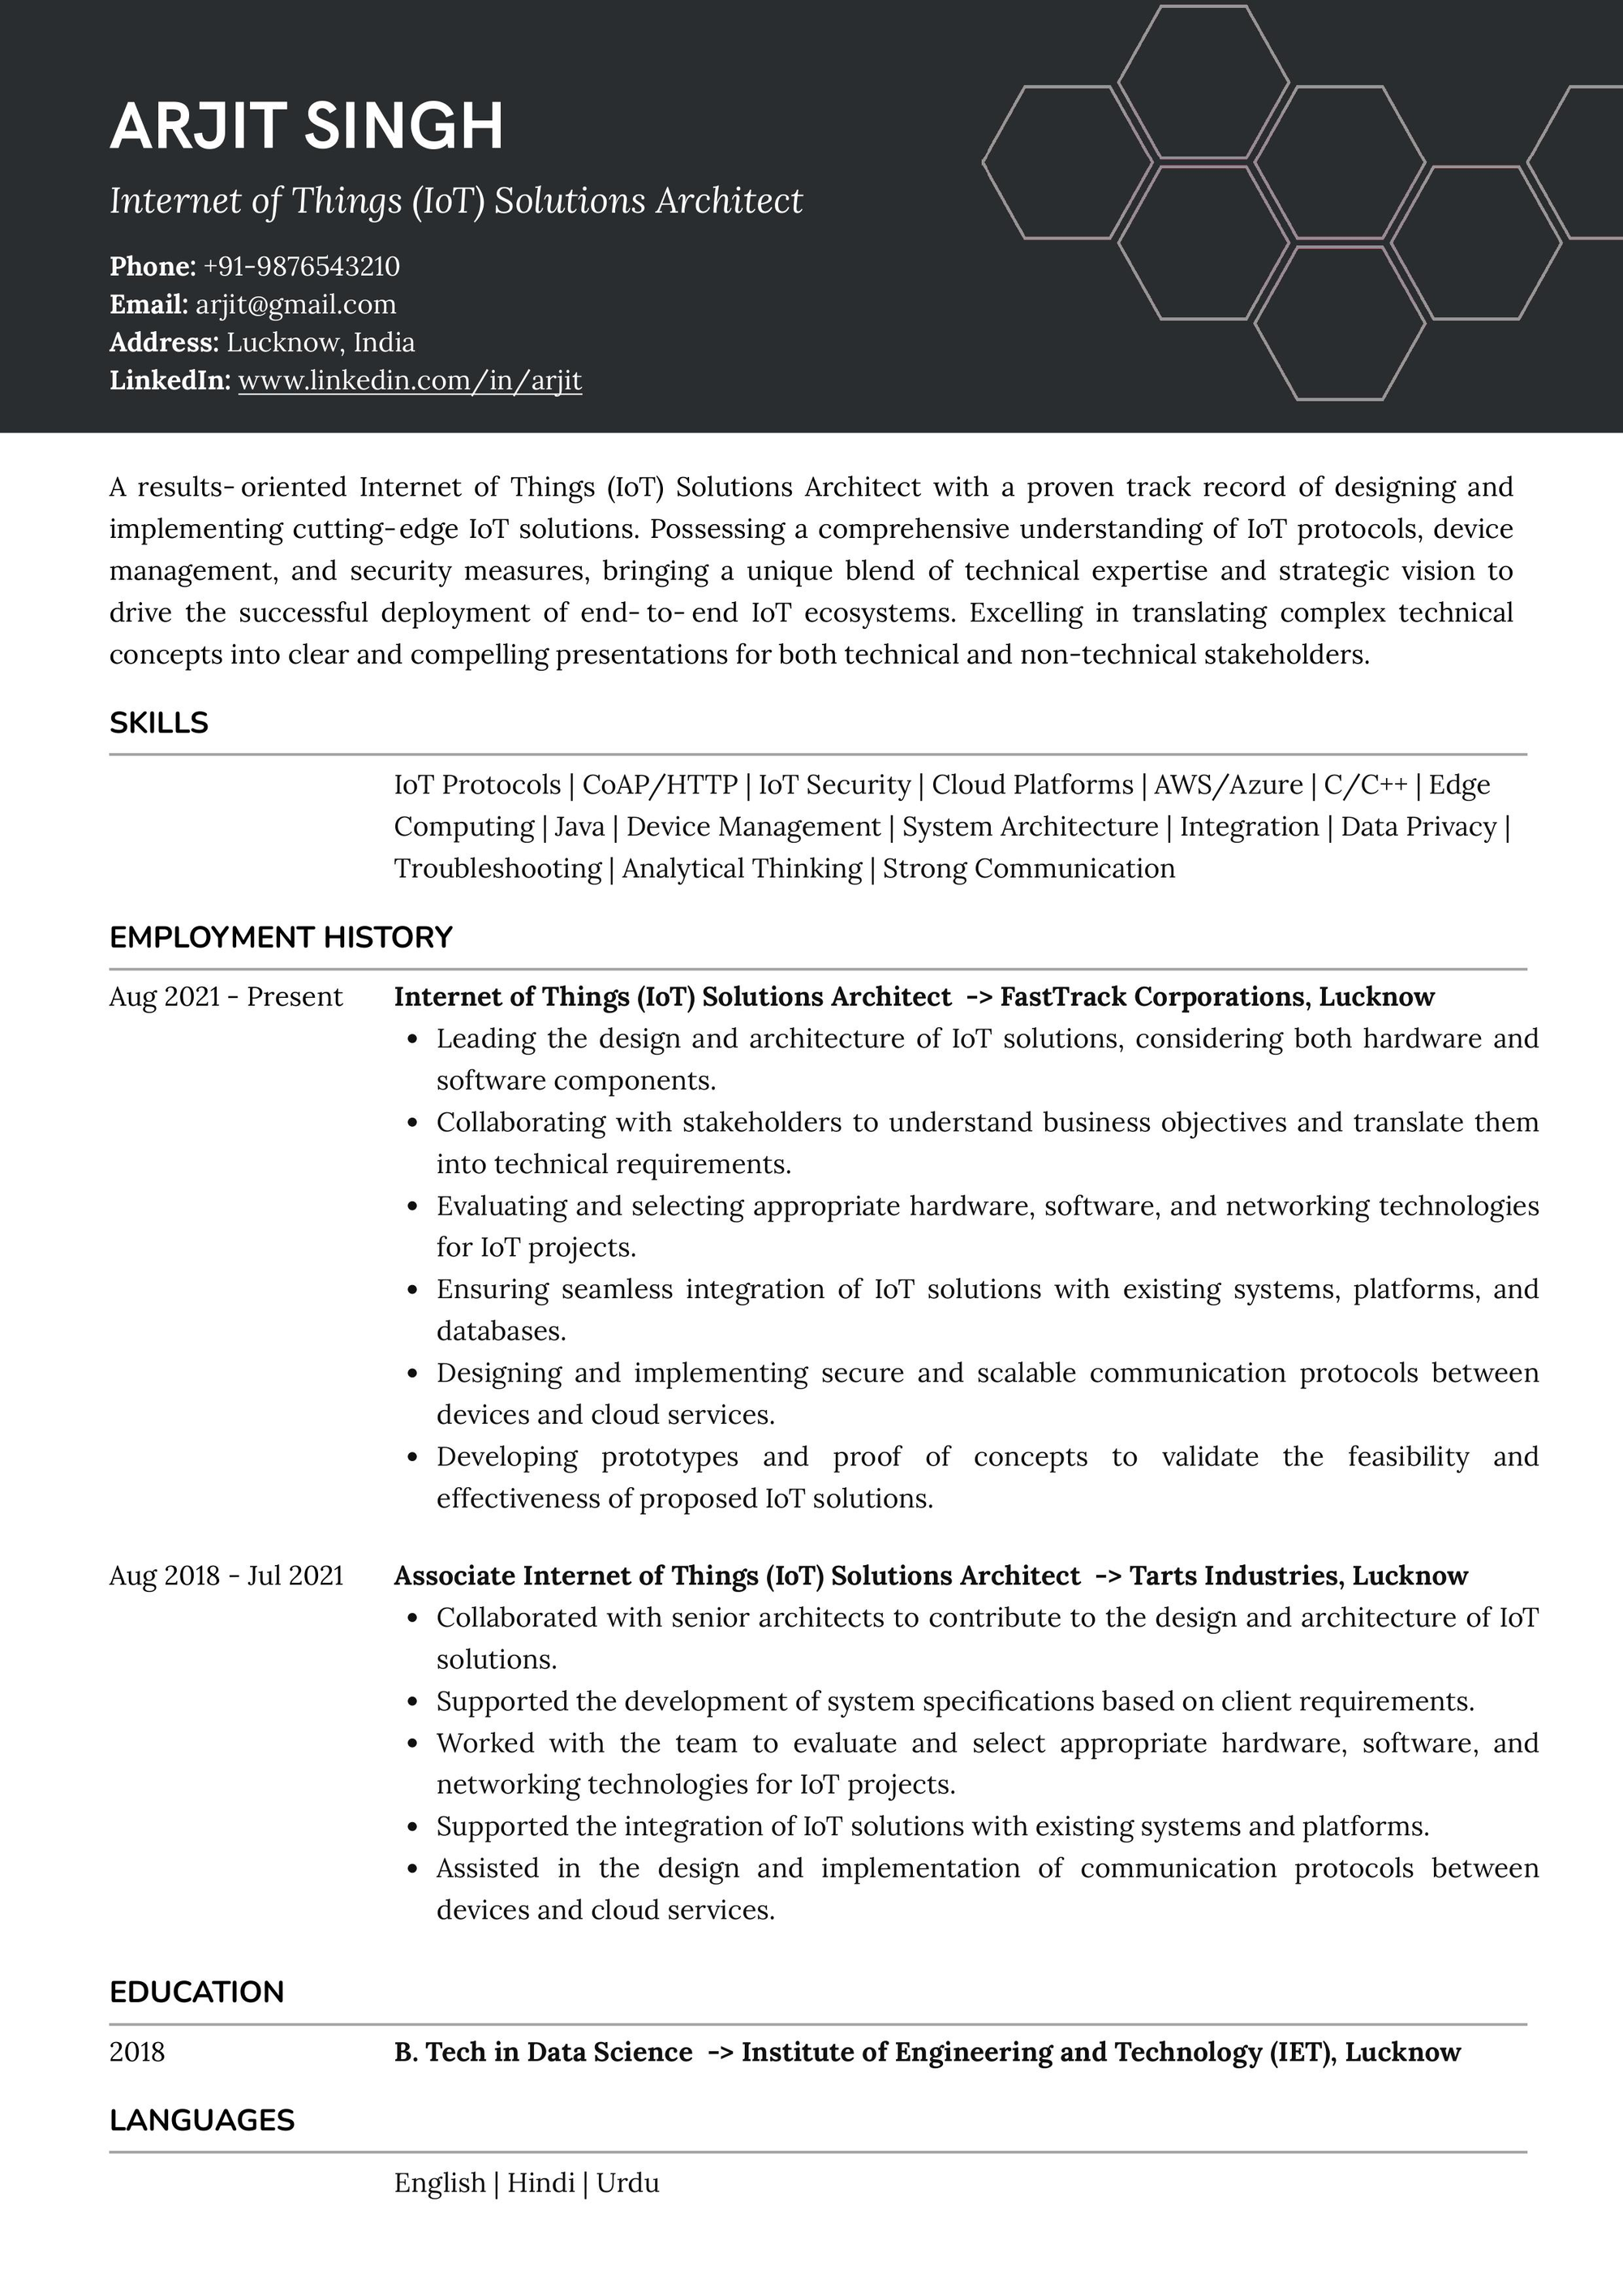 Resume of Internet of Things (IoT) Solutions Architect 